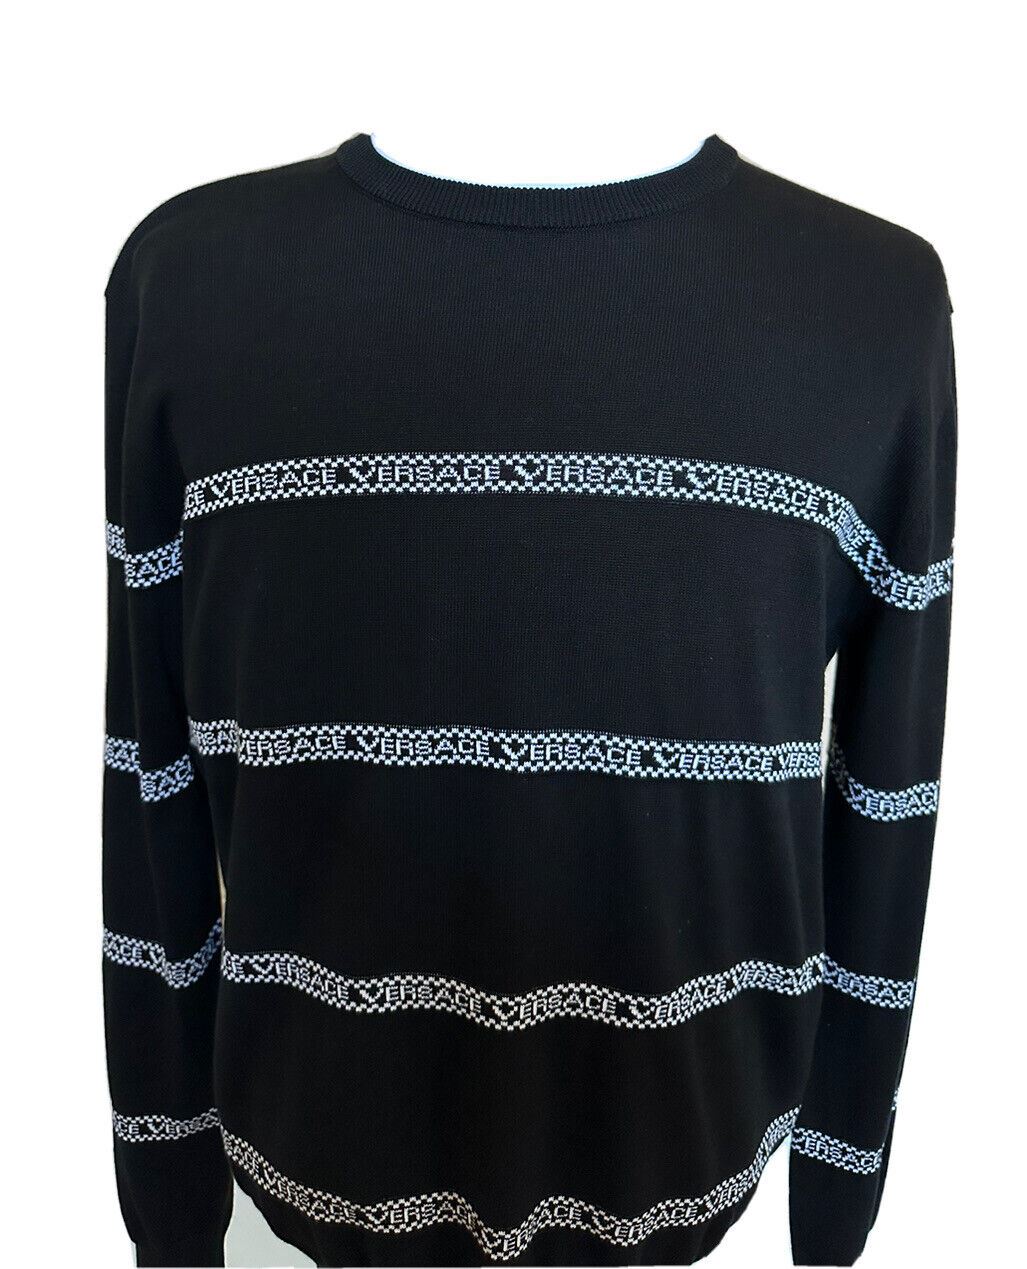 NWT $850 Versace Logo Cotton Knit Sweater Black 50 (Large) Italy A89468S